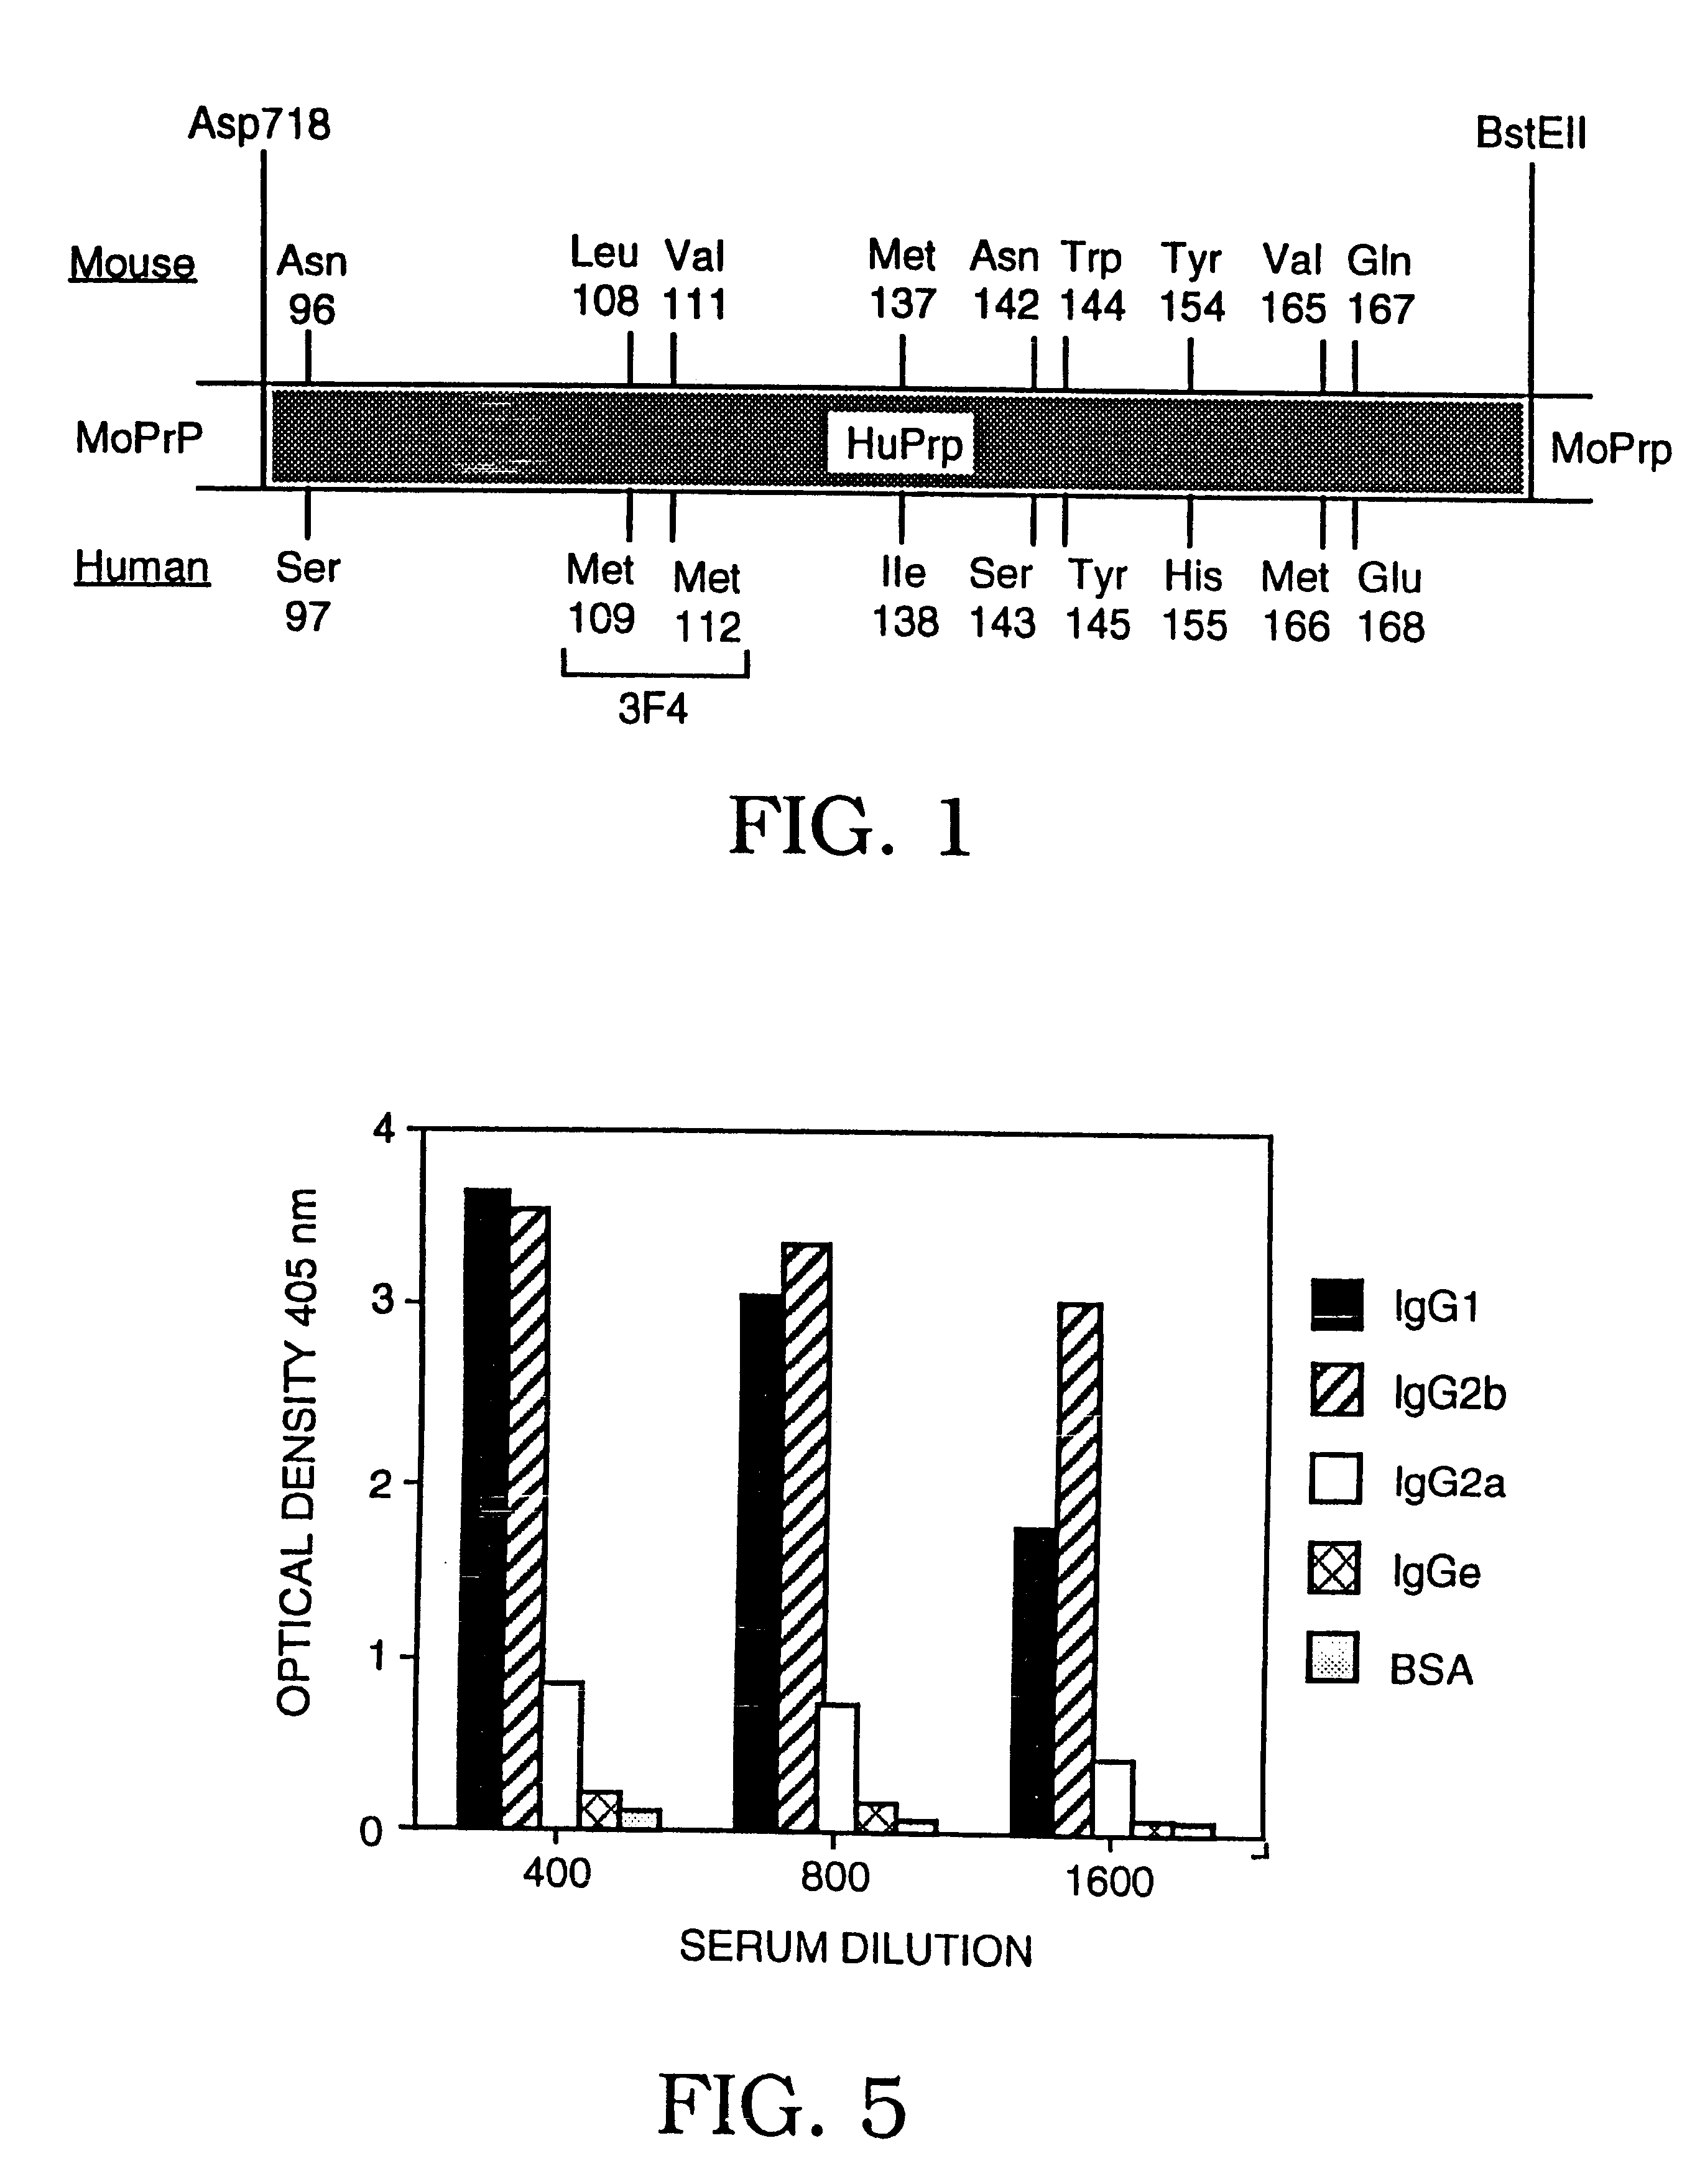 Antibodies specific for native PrPSc